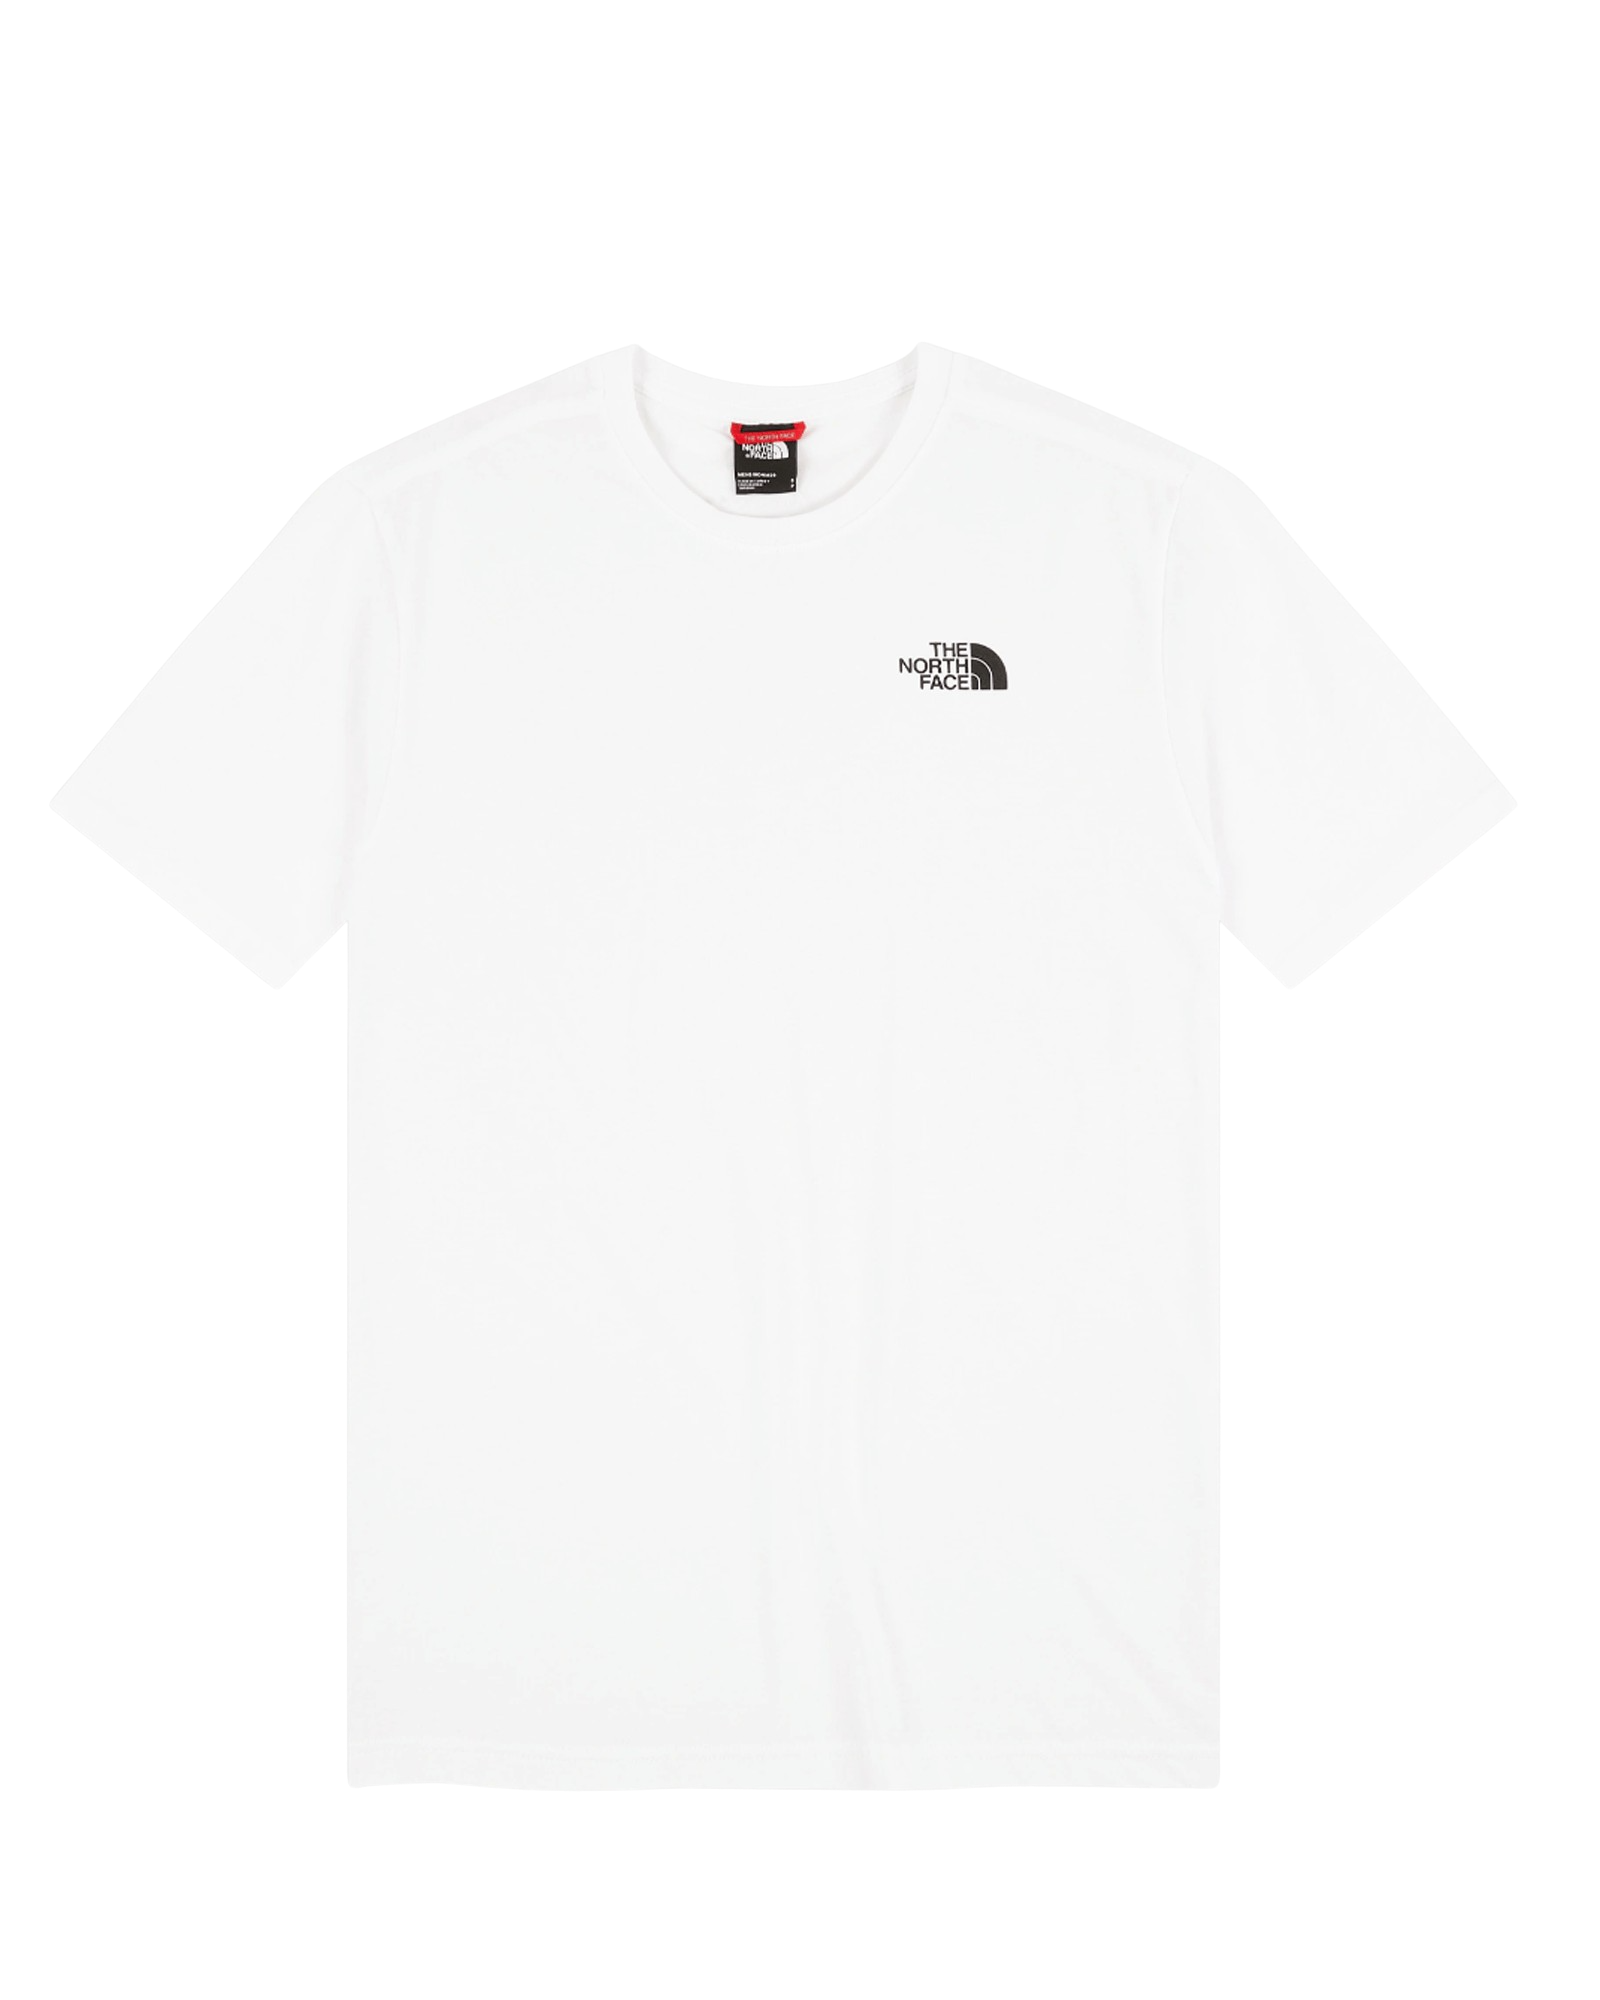 THE NORTH FACE - Men's Mountain Outlines T-shirt White/Black